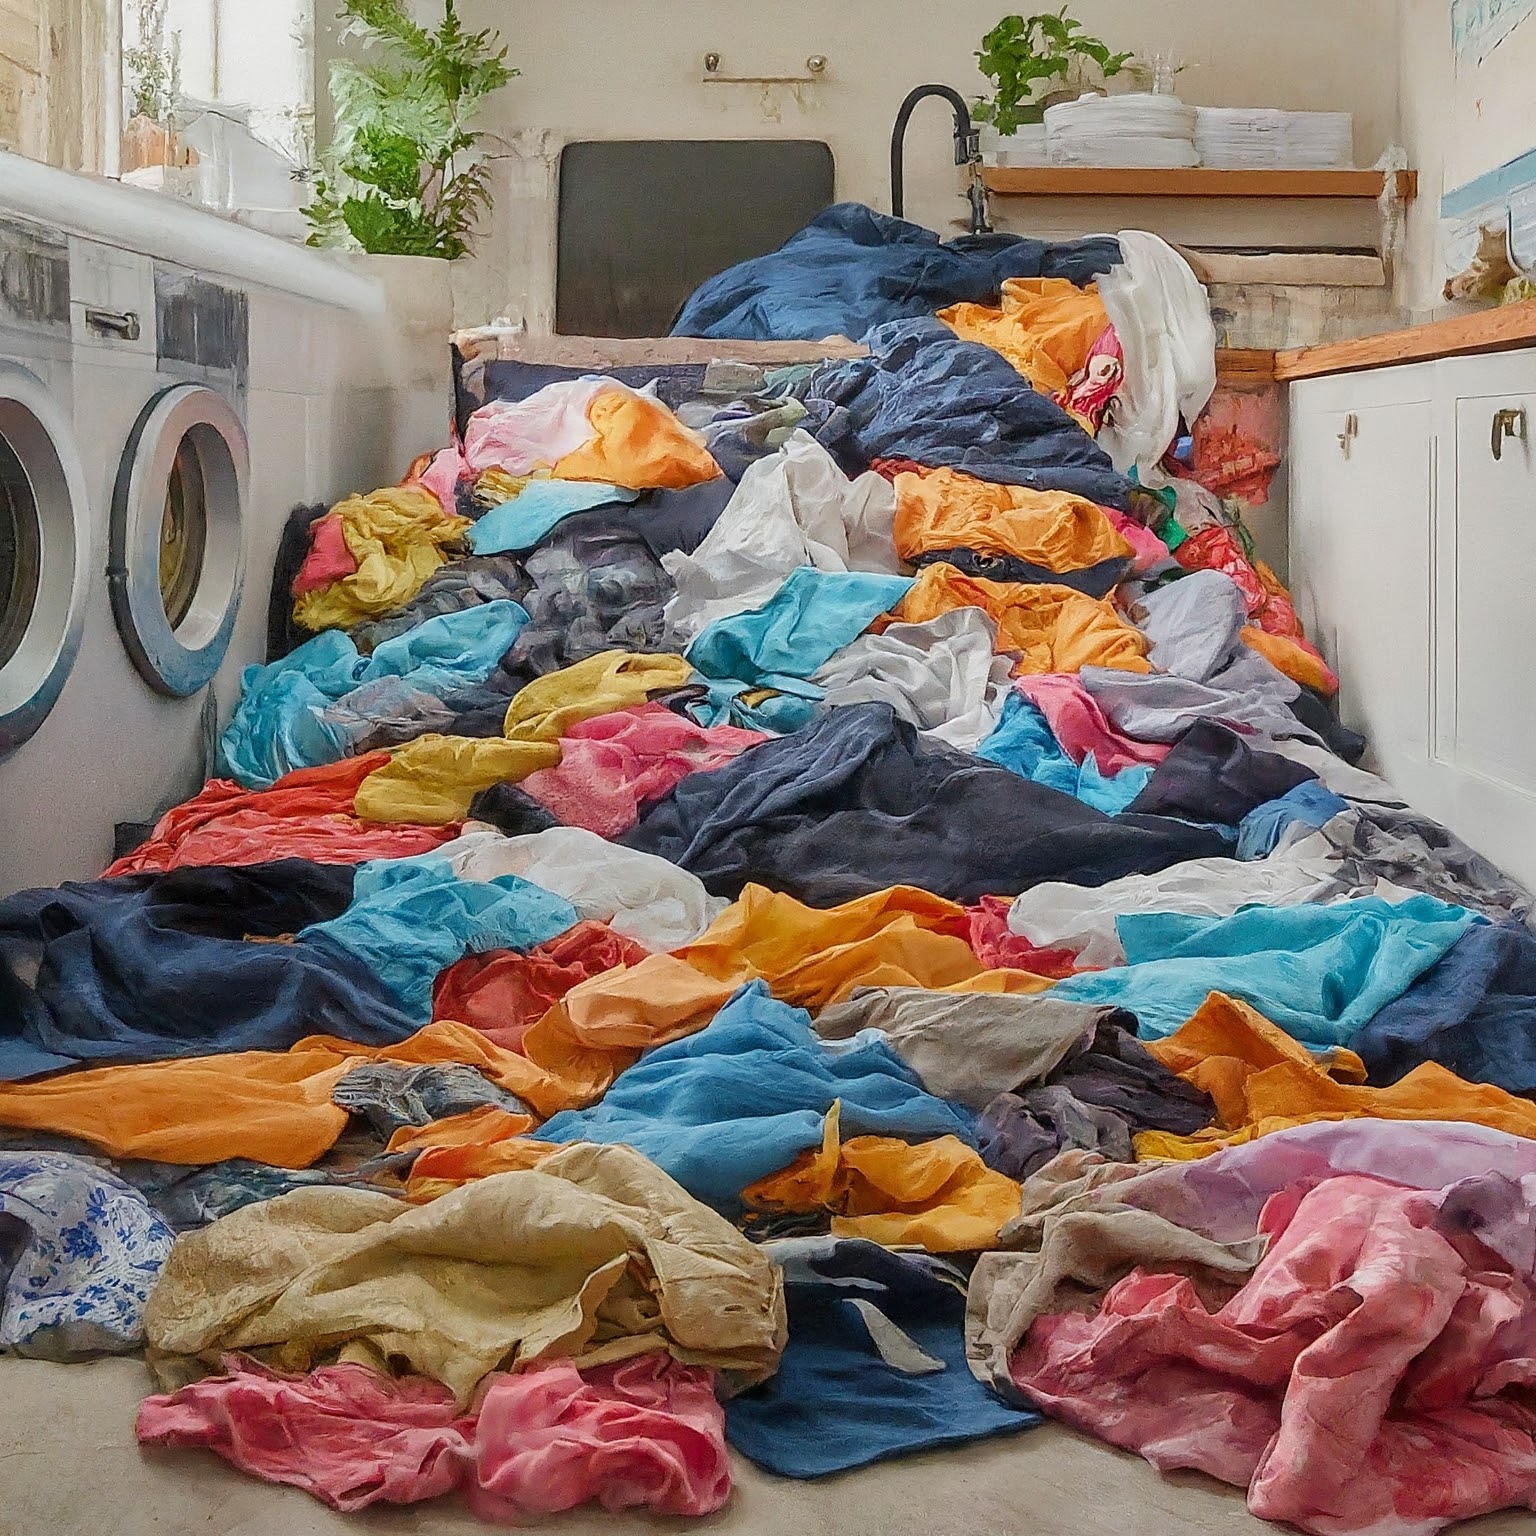 Piled Laundry In Laundry Room